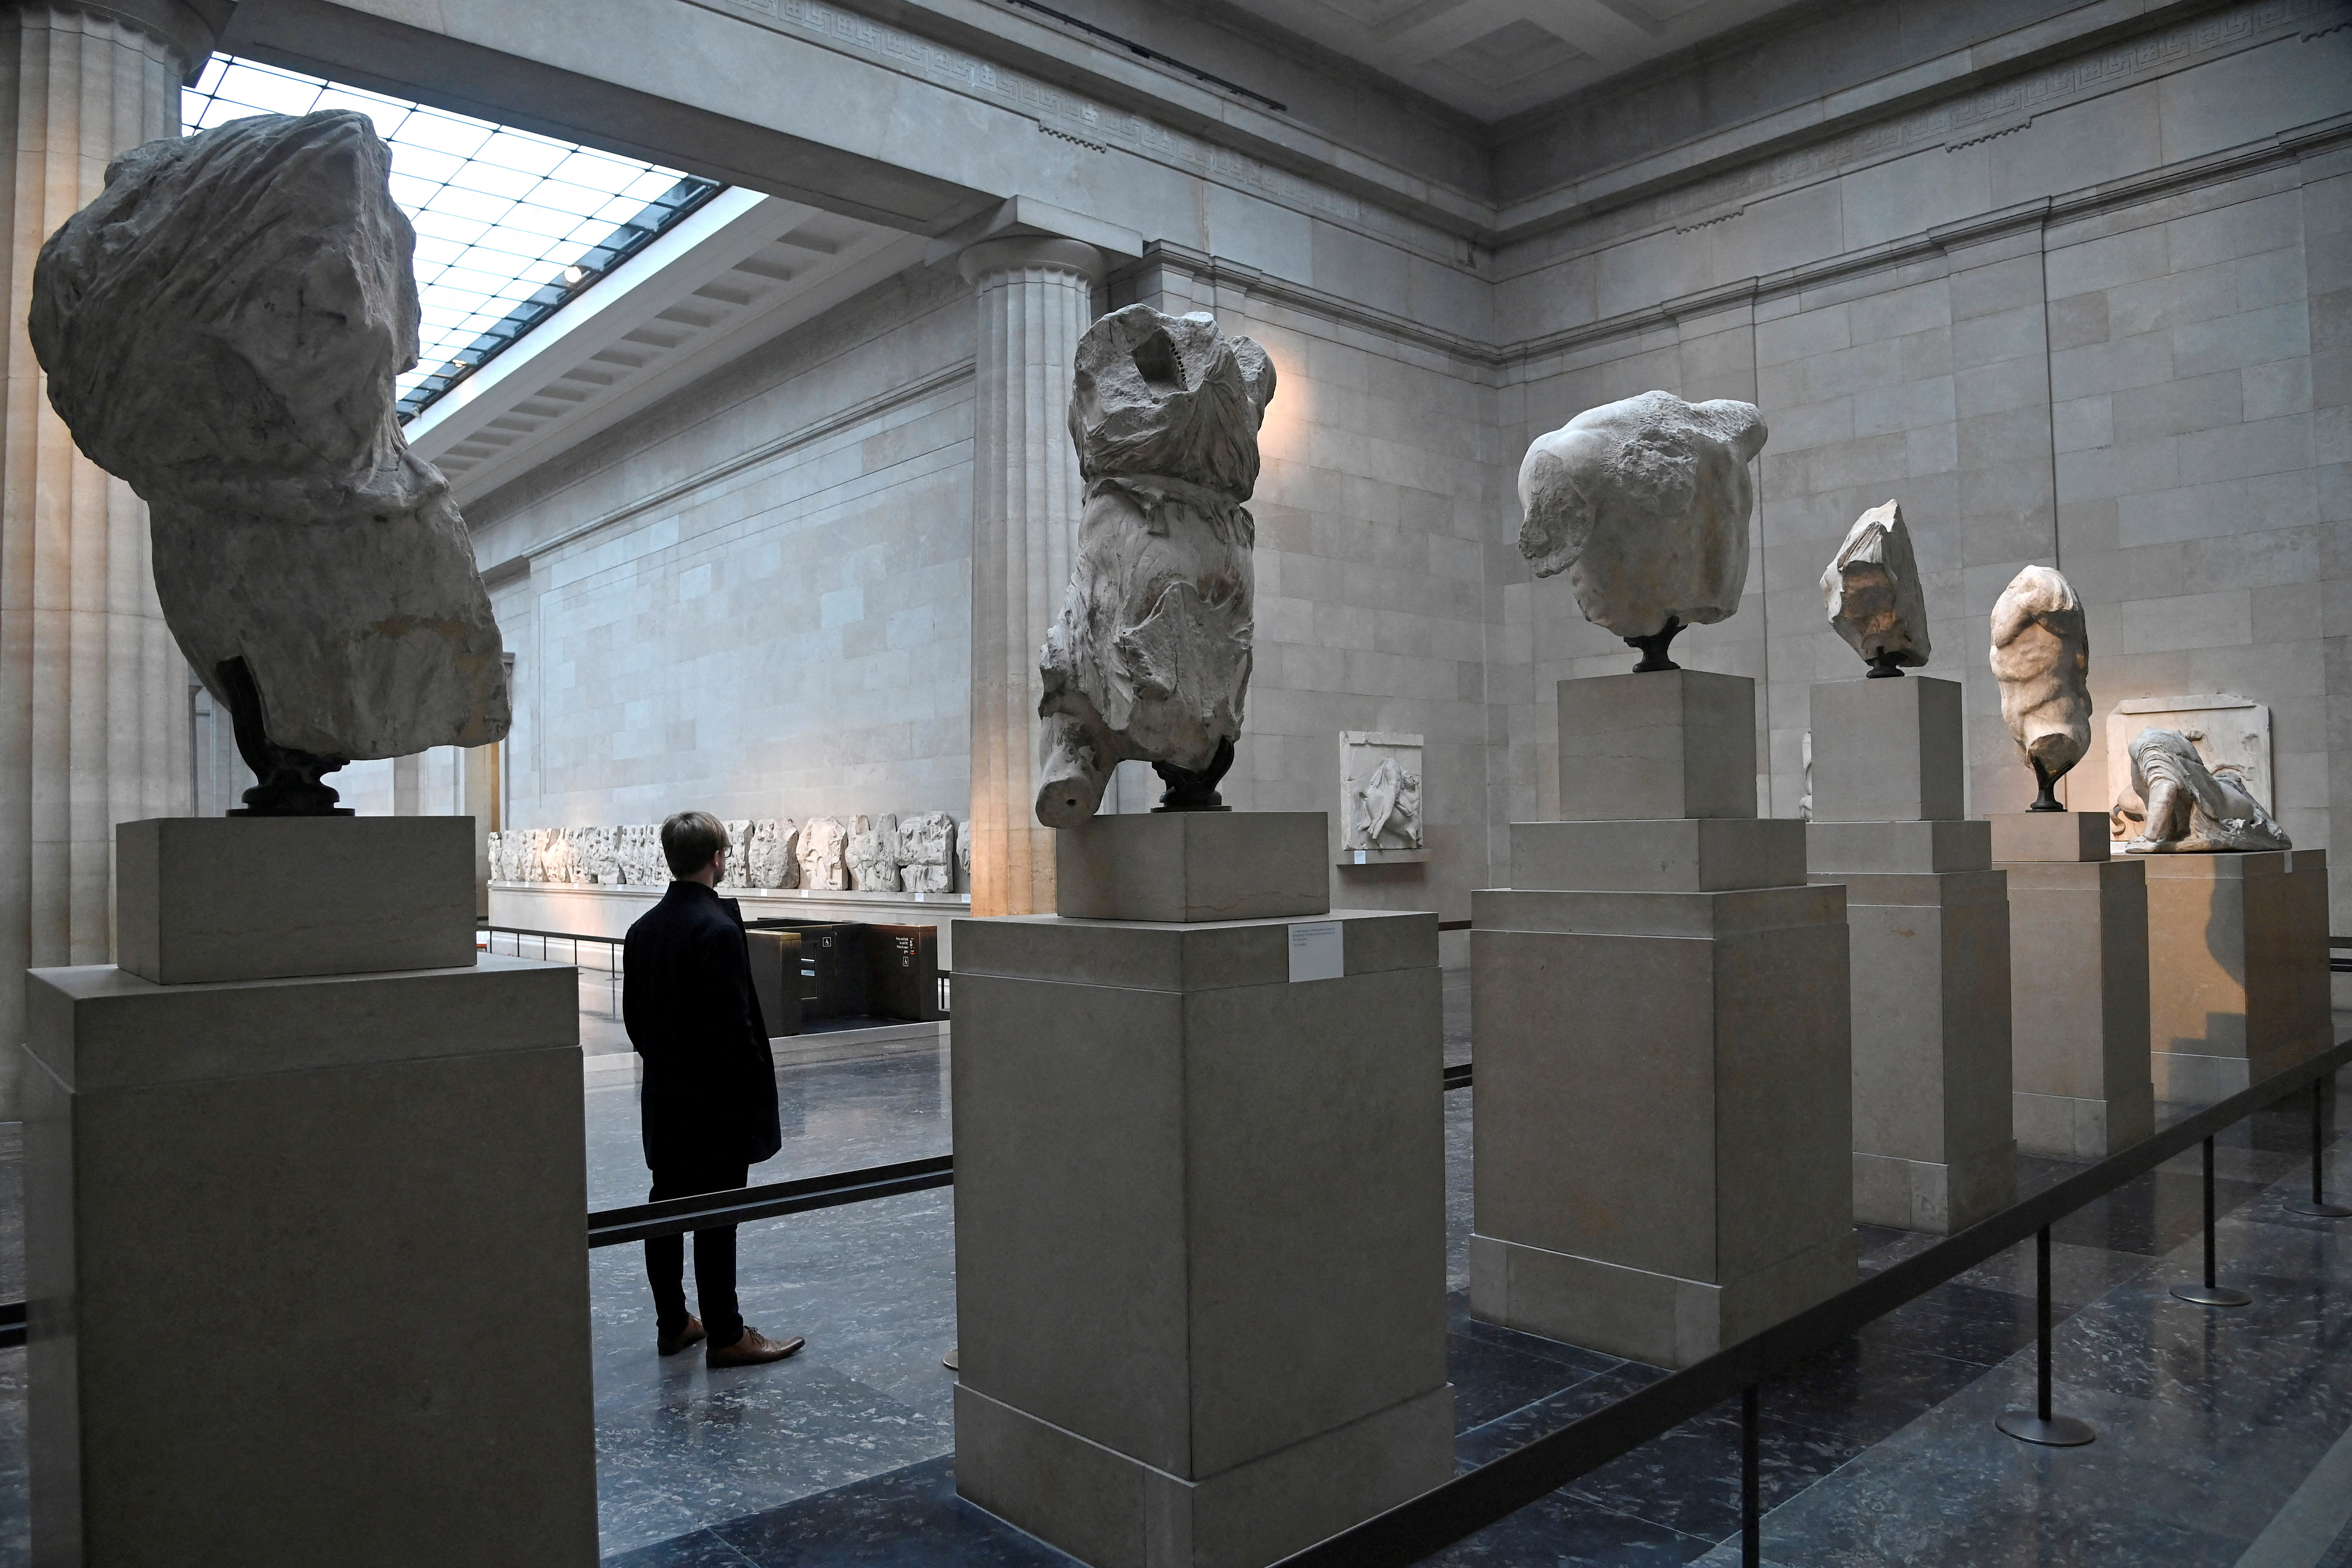 image Greek government and British Museum looking to strike deal over Parthenon marbles